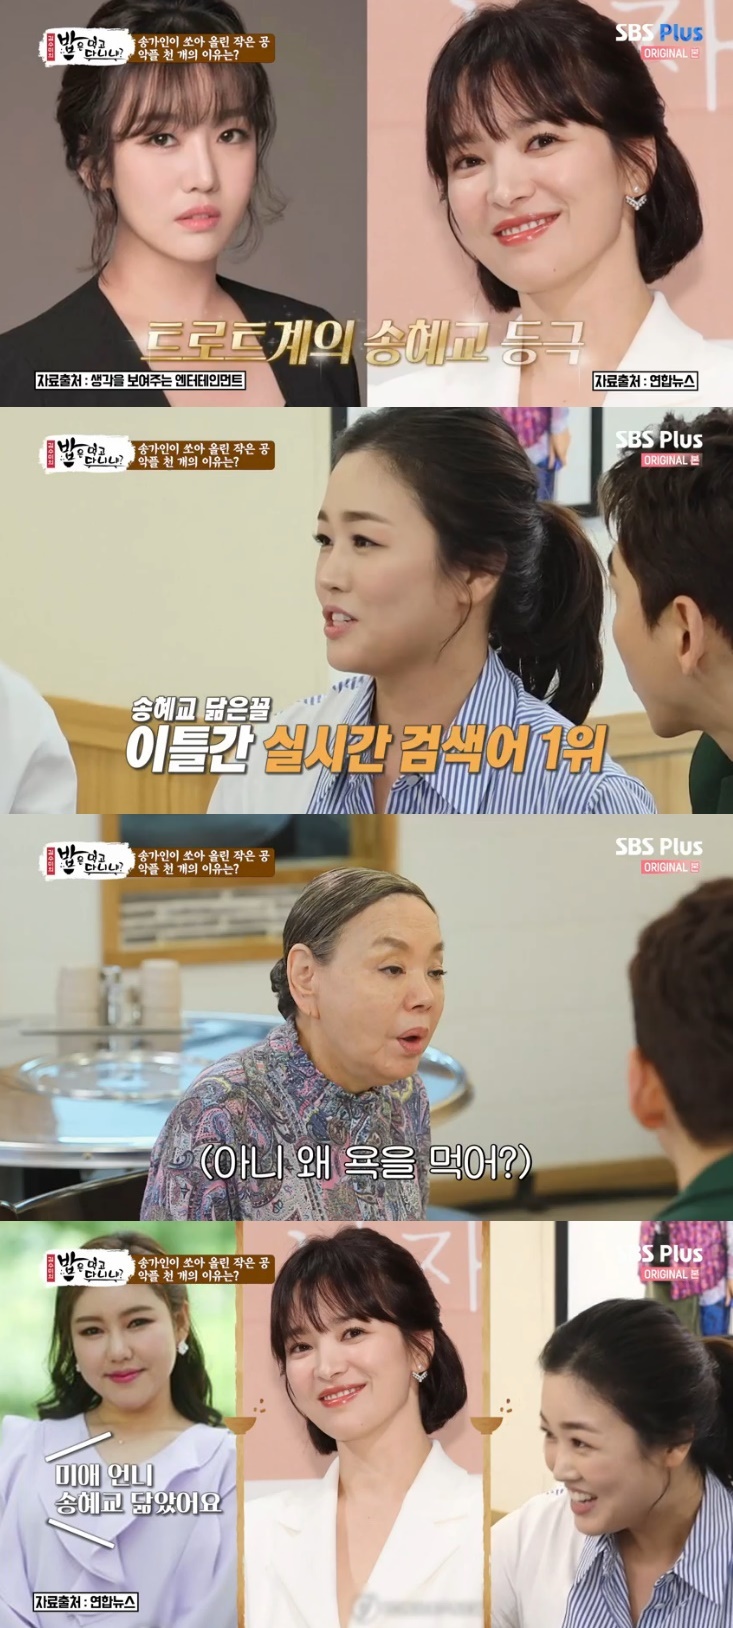 Seoul =) = Trot singer The Miami was embarrassed to mention Song Hye-kyo resemblanceIn the SBS Plus entertainment program Do You Eat the Bob of Kim Soo-mi? (Eat it), which was broadcast on the afternoon of the 27th, The Miami met Kim Soo-mi in search of a rice bowl house.Kim Soo-mi said as soon as she saw The Miami, she looked similar to actor Song Hye-kyo; so, Who told that story on the air.I was the number one real-time search term for two days, he said.In particular, The Miami expressed bitterness, saying, I was swearing a lot, I did not look like it, but I resemble it. Kim Soo-mi was absurd, saying, Why do you swear?When Yoon Jung-soo asked, Who said that at first?, The Miami explained, On other broadcasts, Song Gain said, My sister Song Hye-kyo resembles.In the meantime, The Miami said, There are more than a thousand evils.